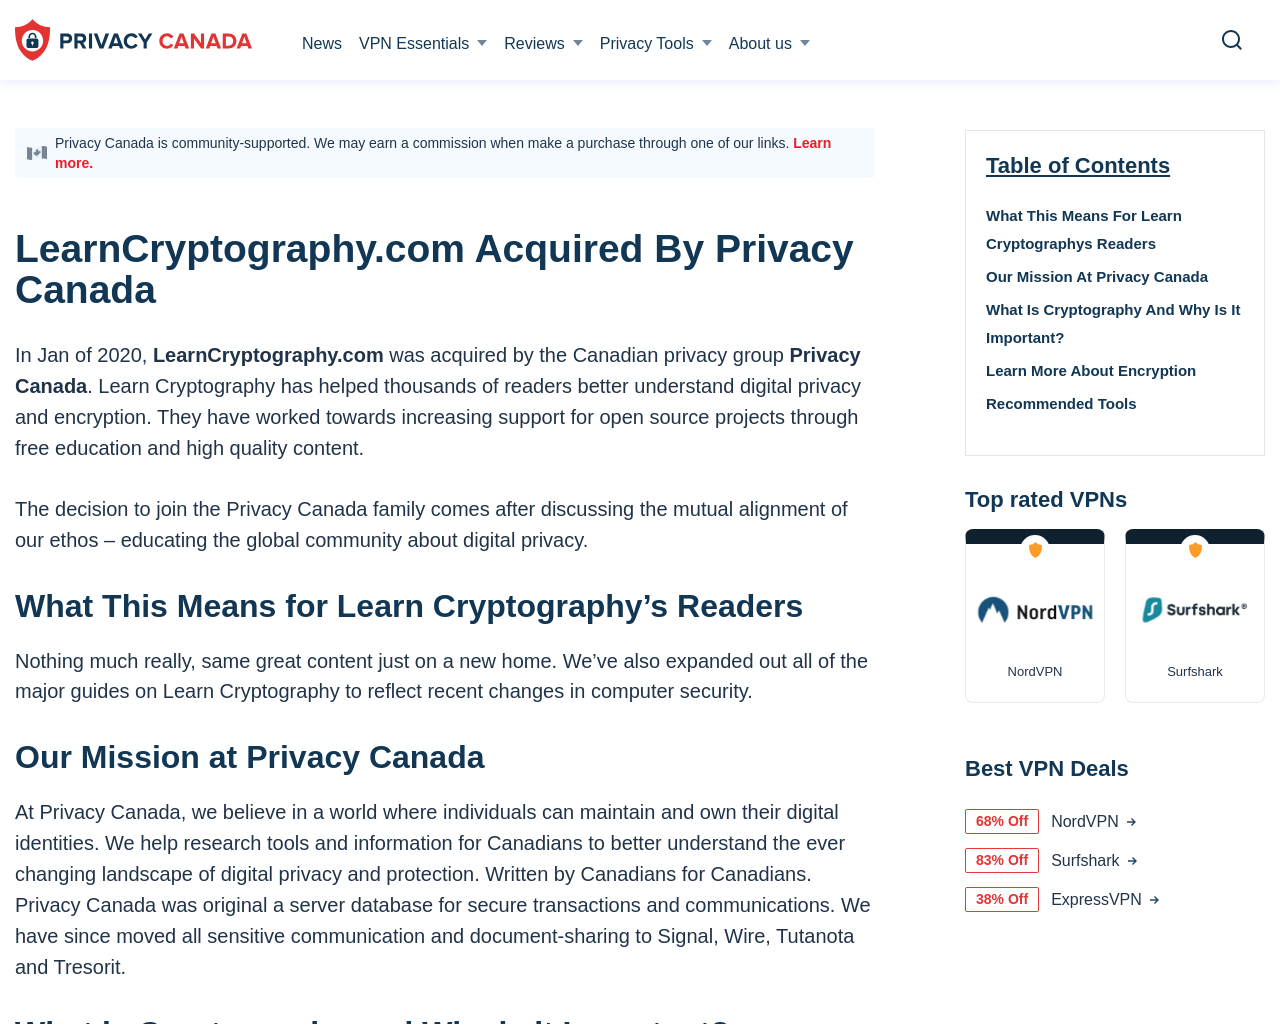 learncryptography.com